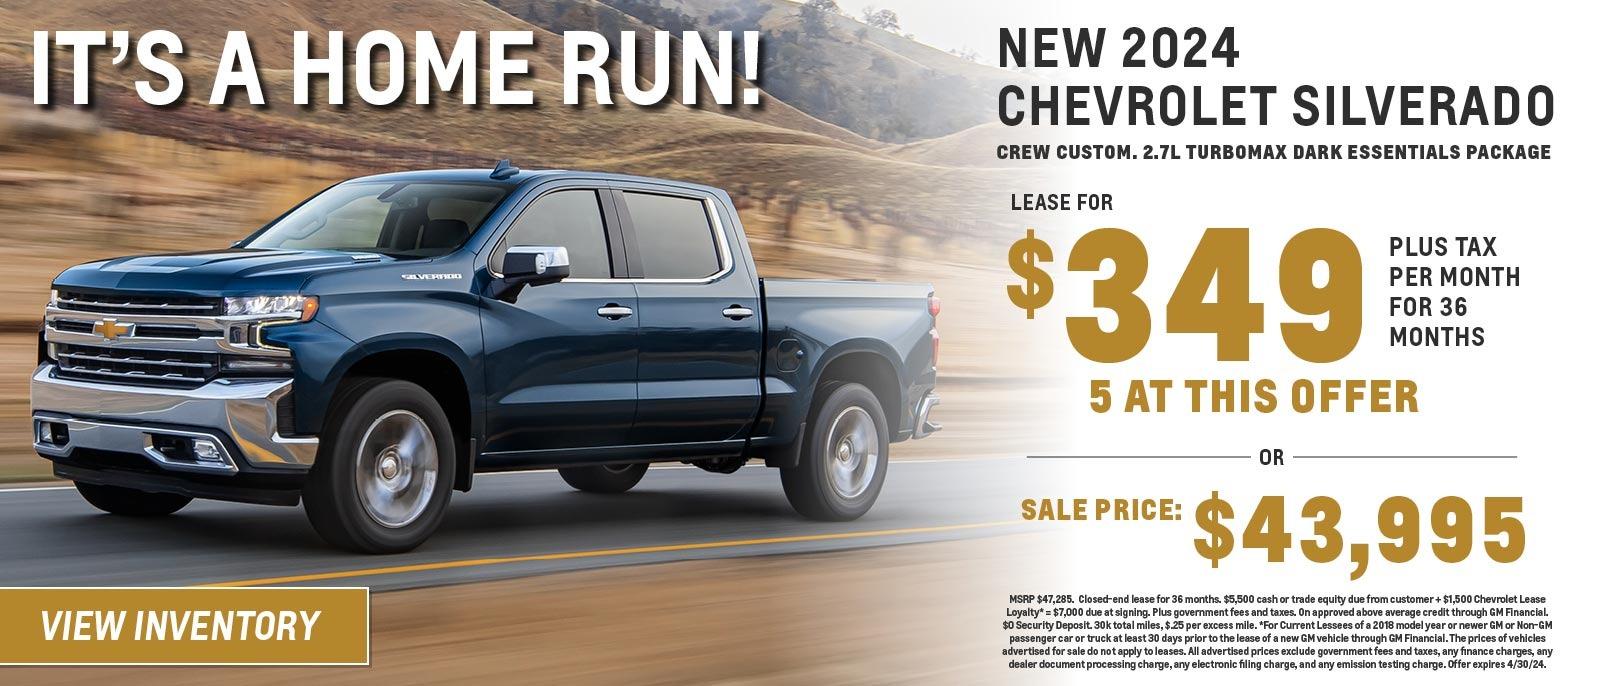 New 2024 Chevrolet Silverado Crew Custom 2.7L Turbomax Dark Essentials Package
Lease for $349/36 months plus tax or Sale price $43,995
5 at this offer